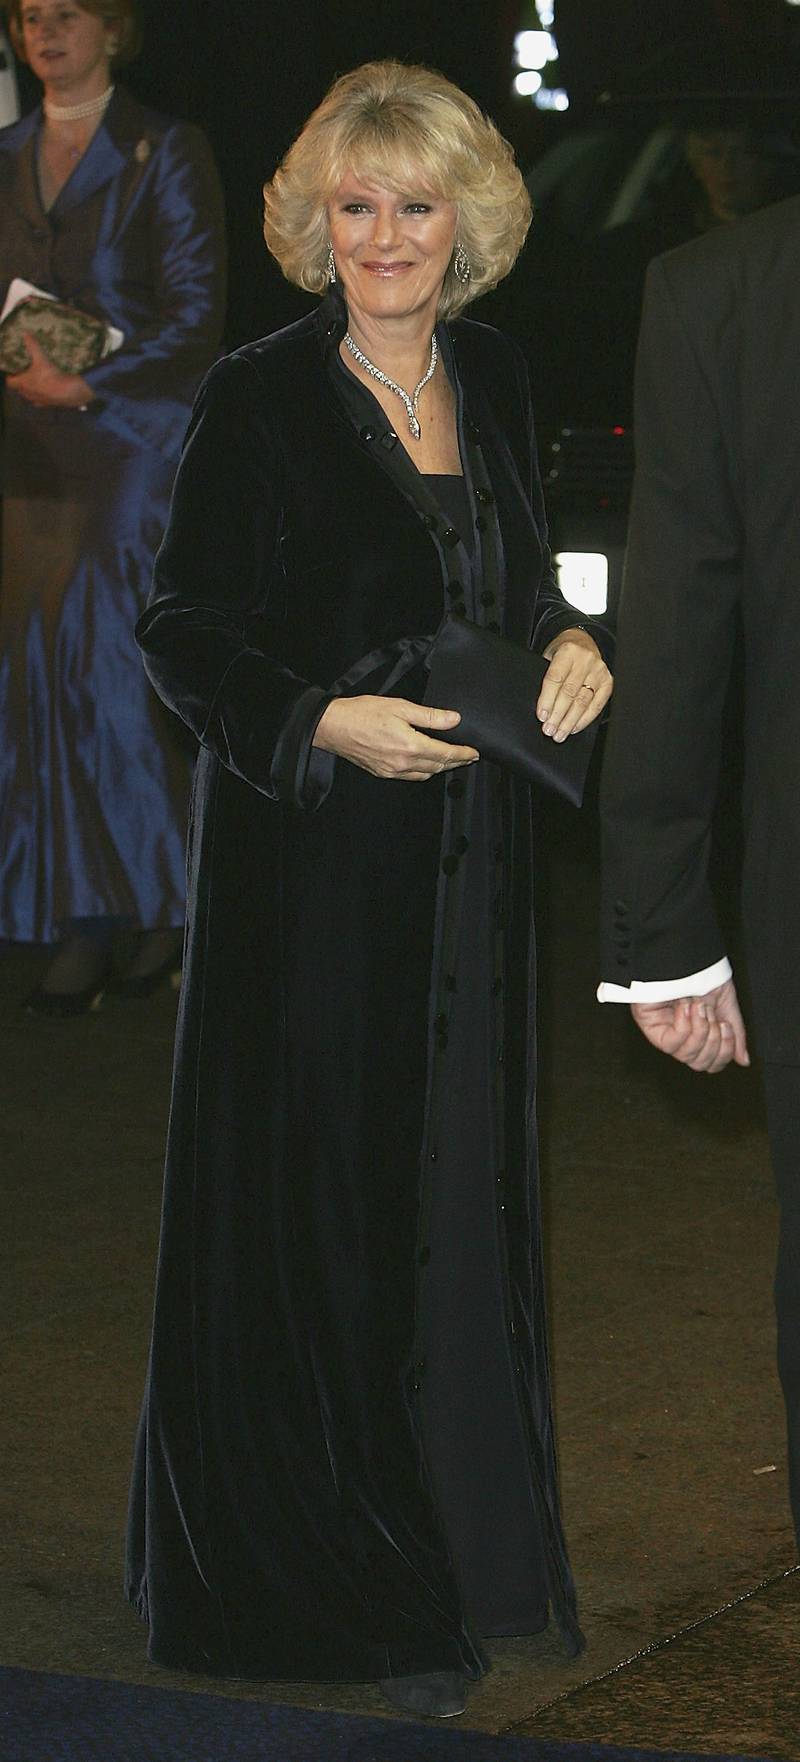 Camilla Parker Bowles, in a black dress and velvet coat, at the UK film premiere of 'Merchant Of Venice' in London on November 29, 2004. Getty Images